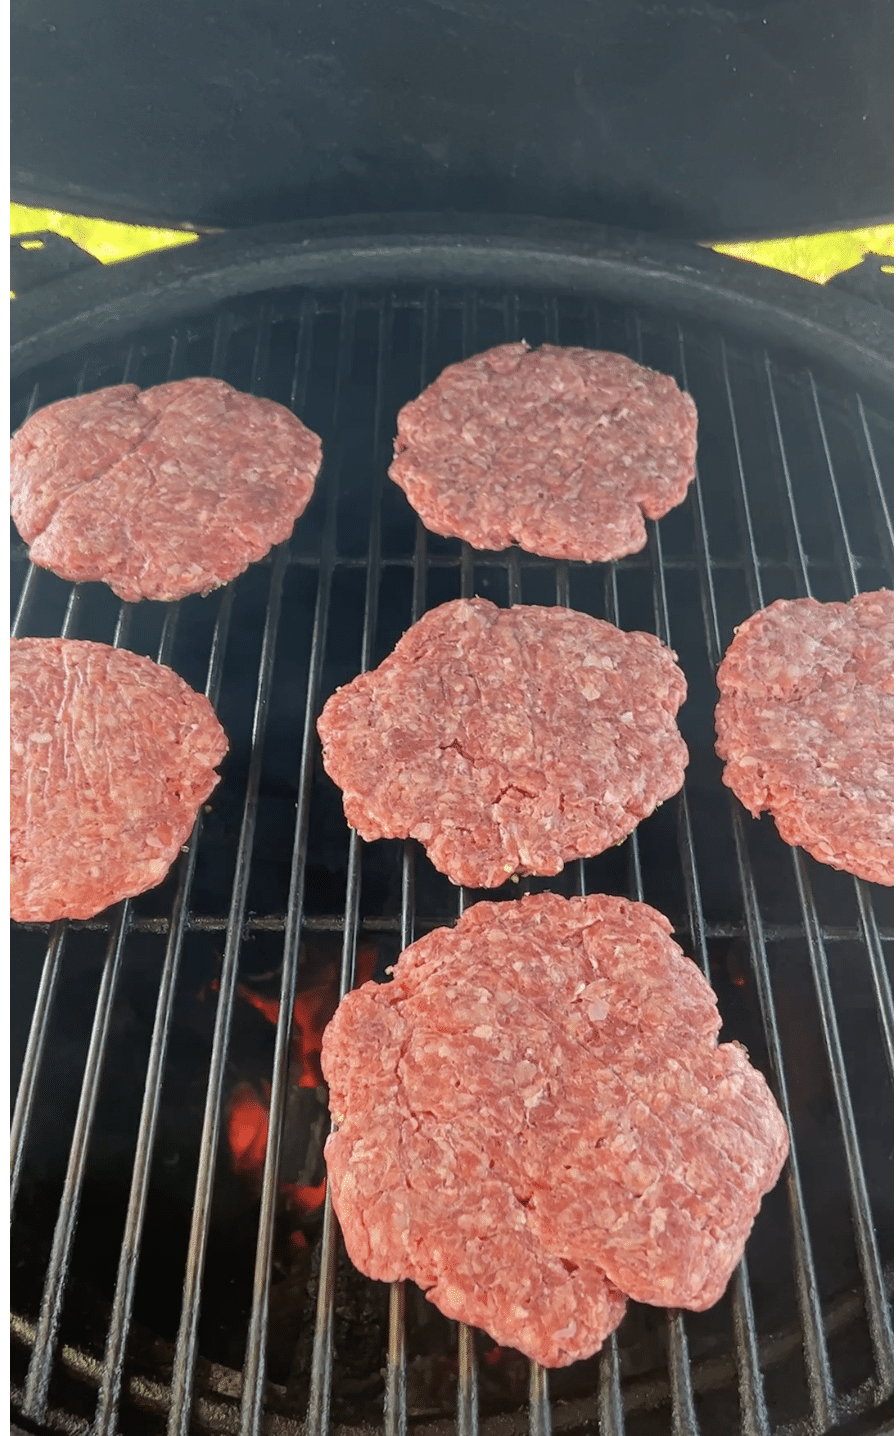 Grilling burgers.